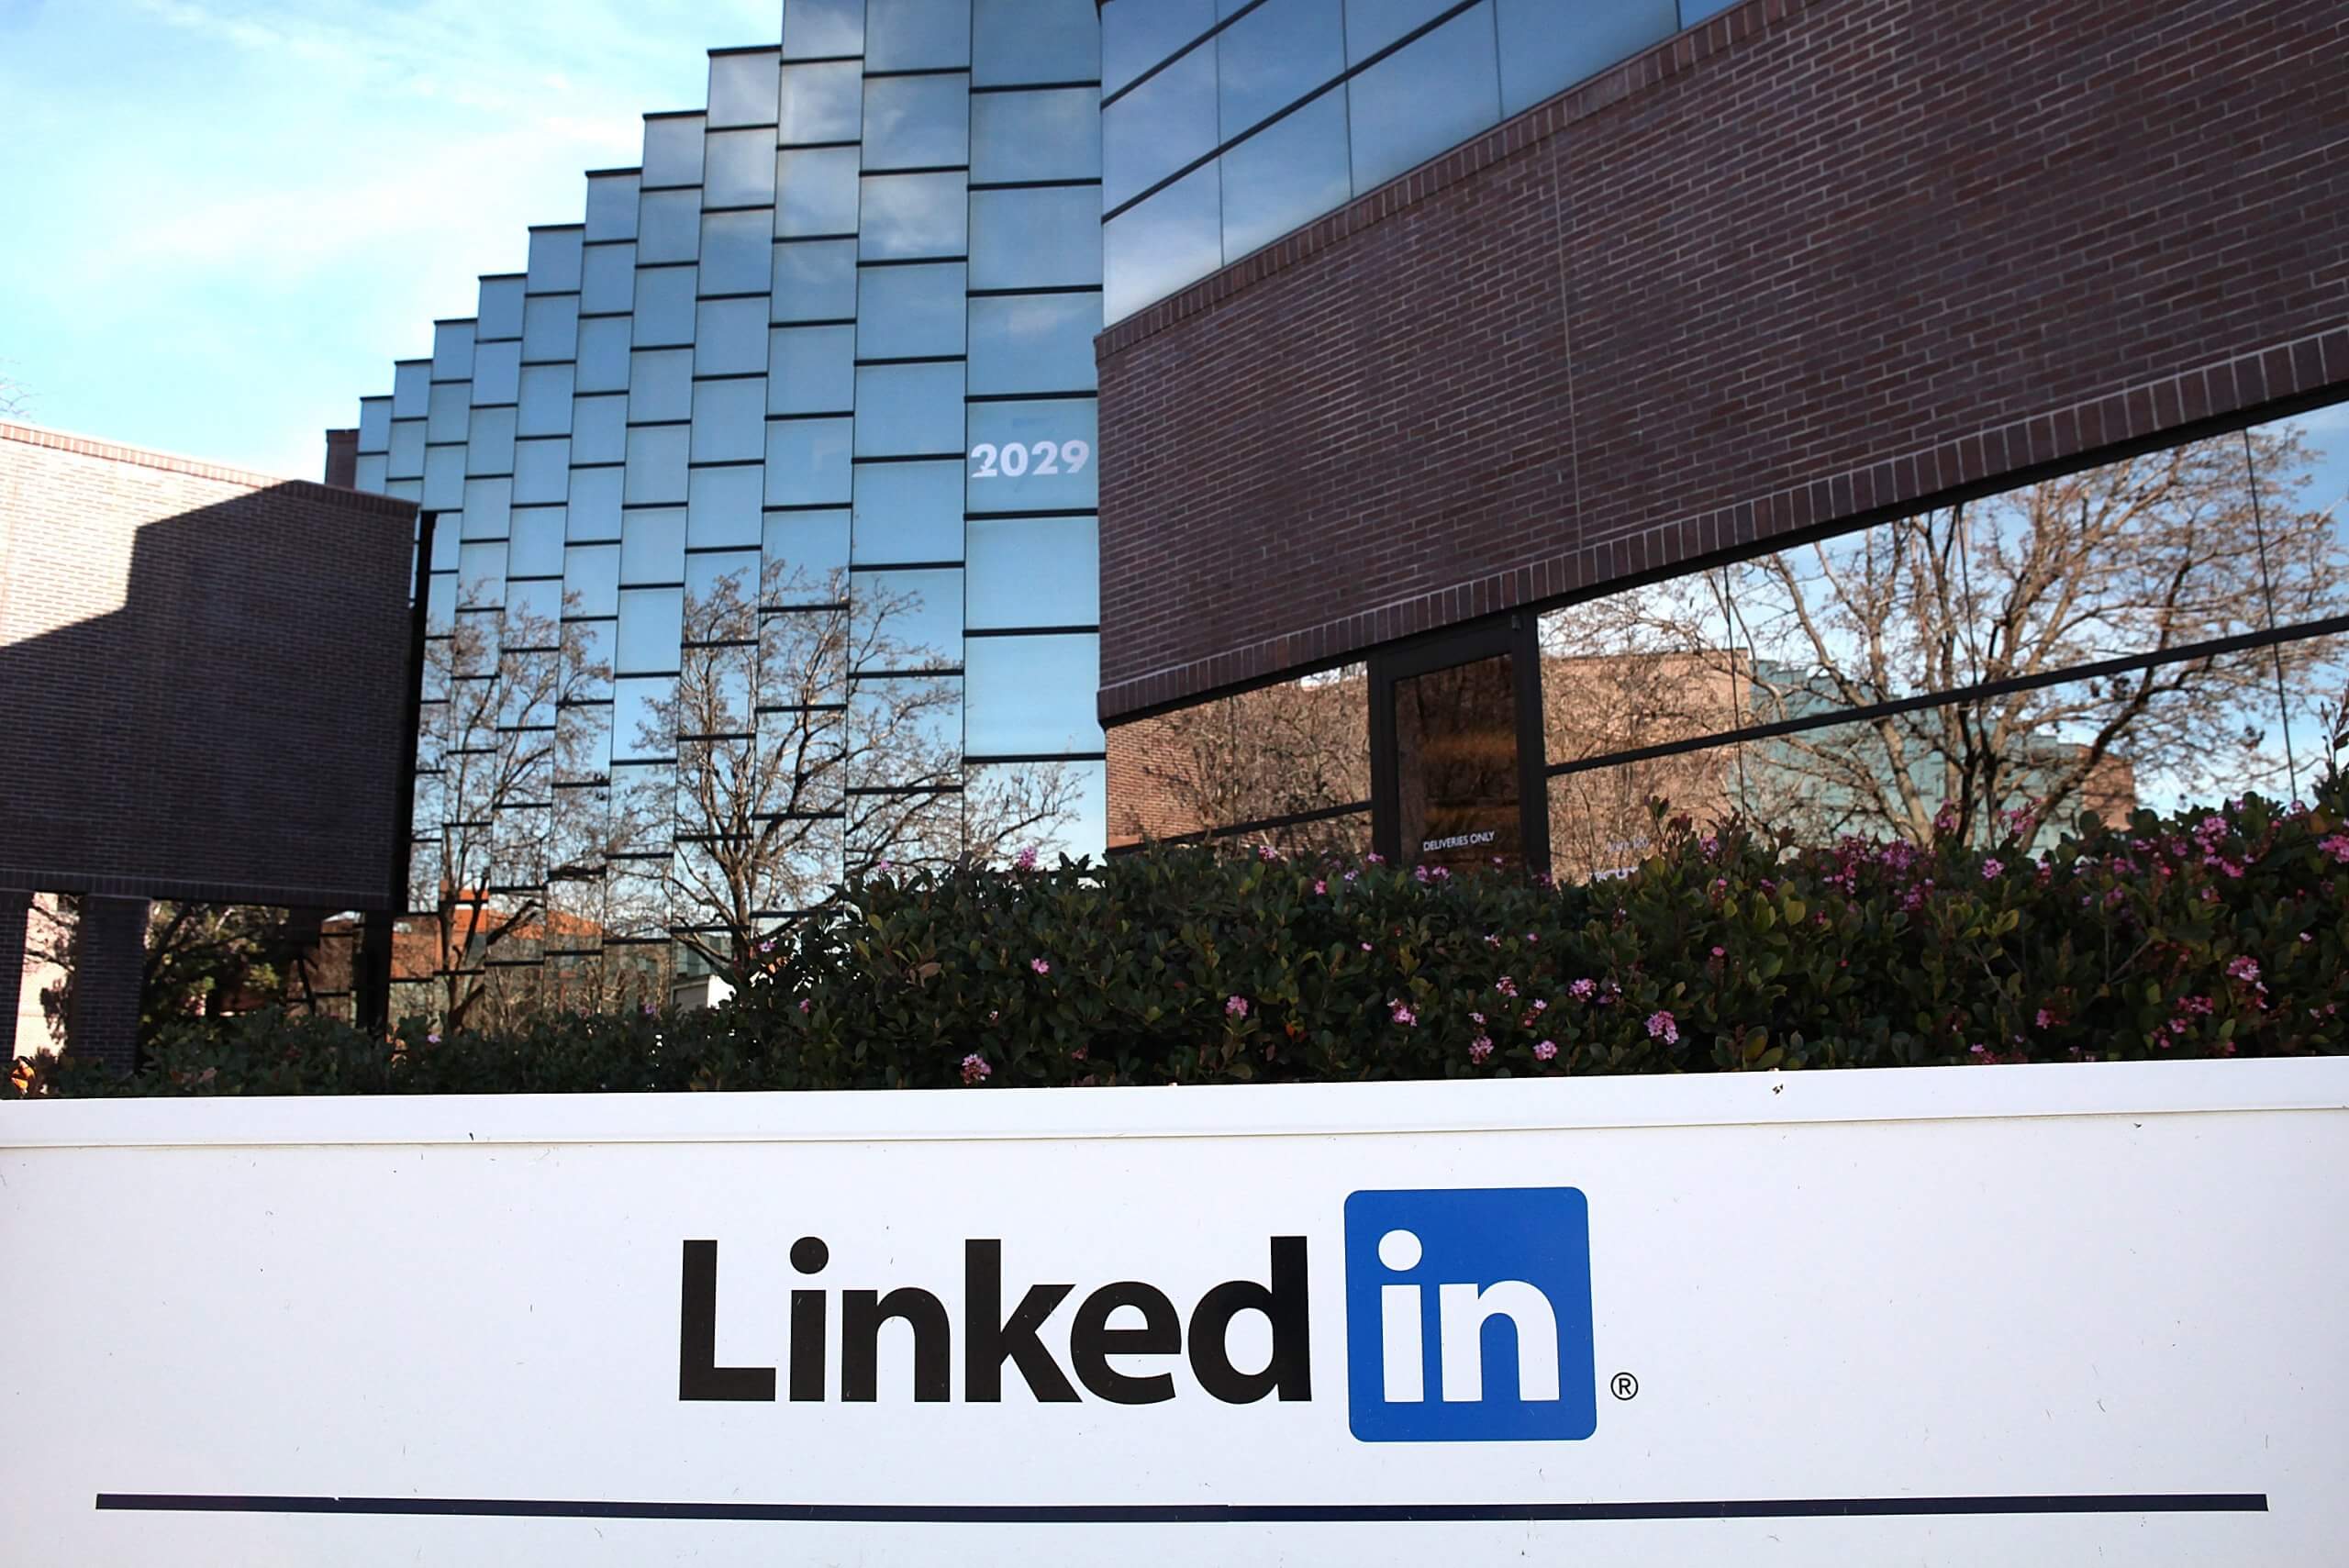 LinkedIn remains the most impersonated brand in phishing scams, followed by Microsoft and DHL